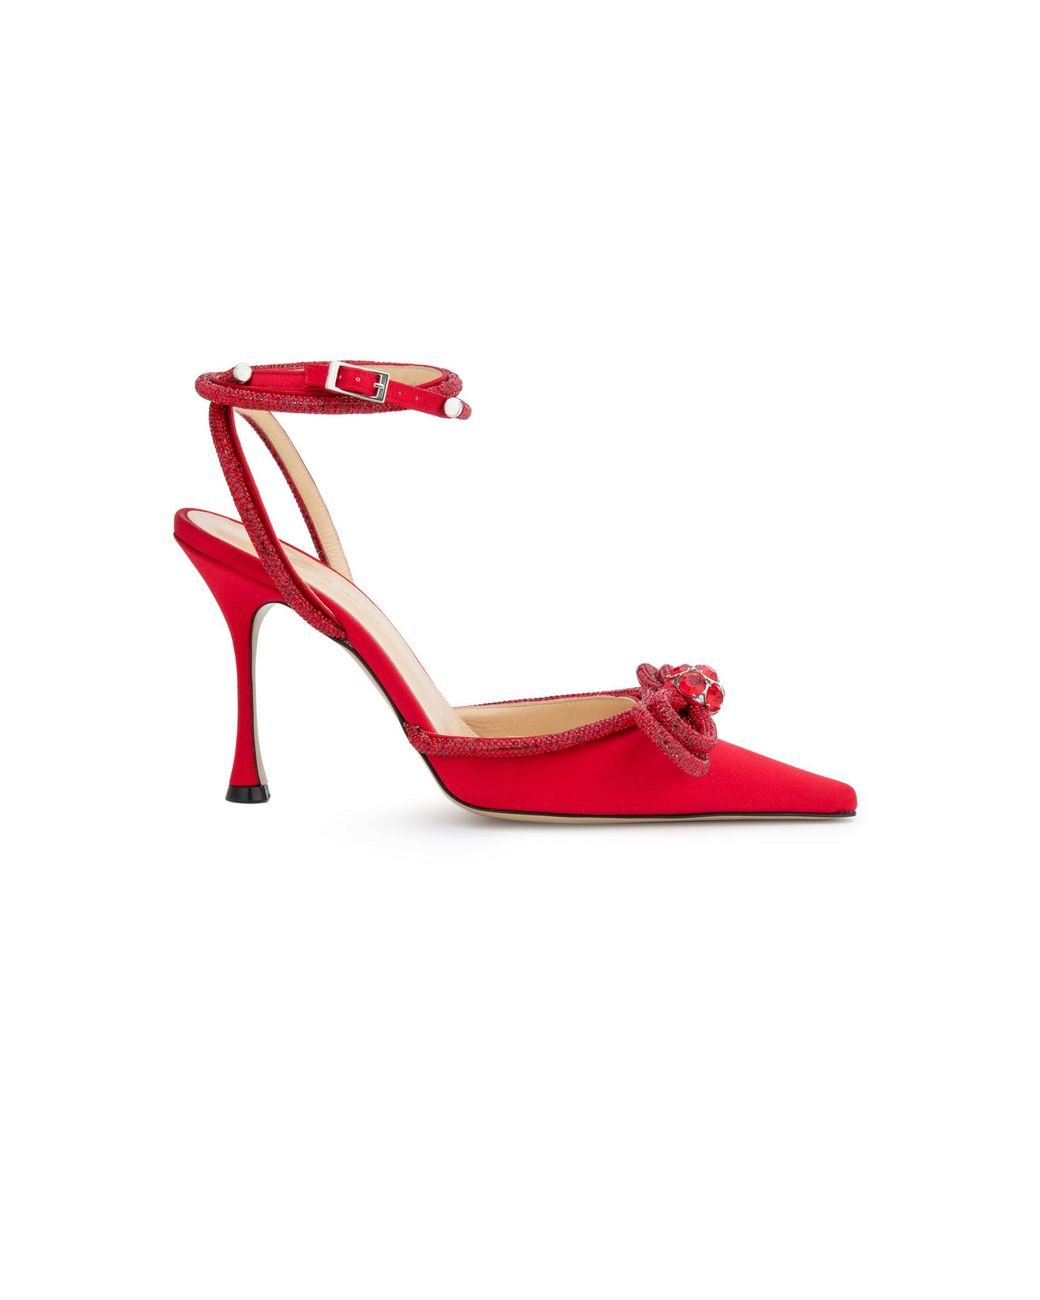 Mach & Mach Satin Double Bow High Heels in Red | Lyst